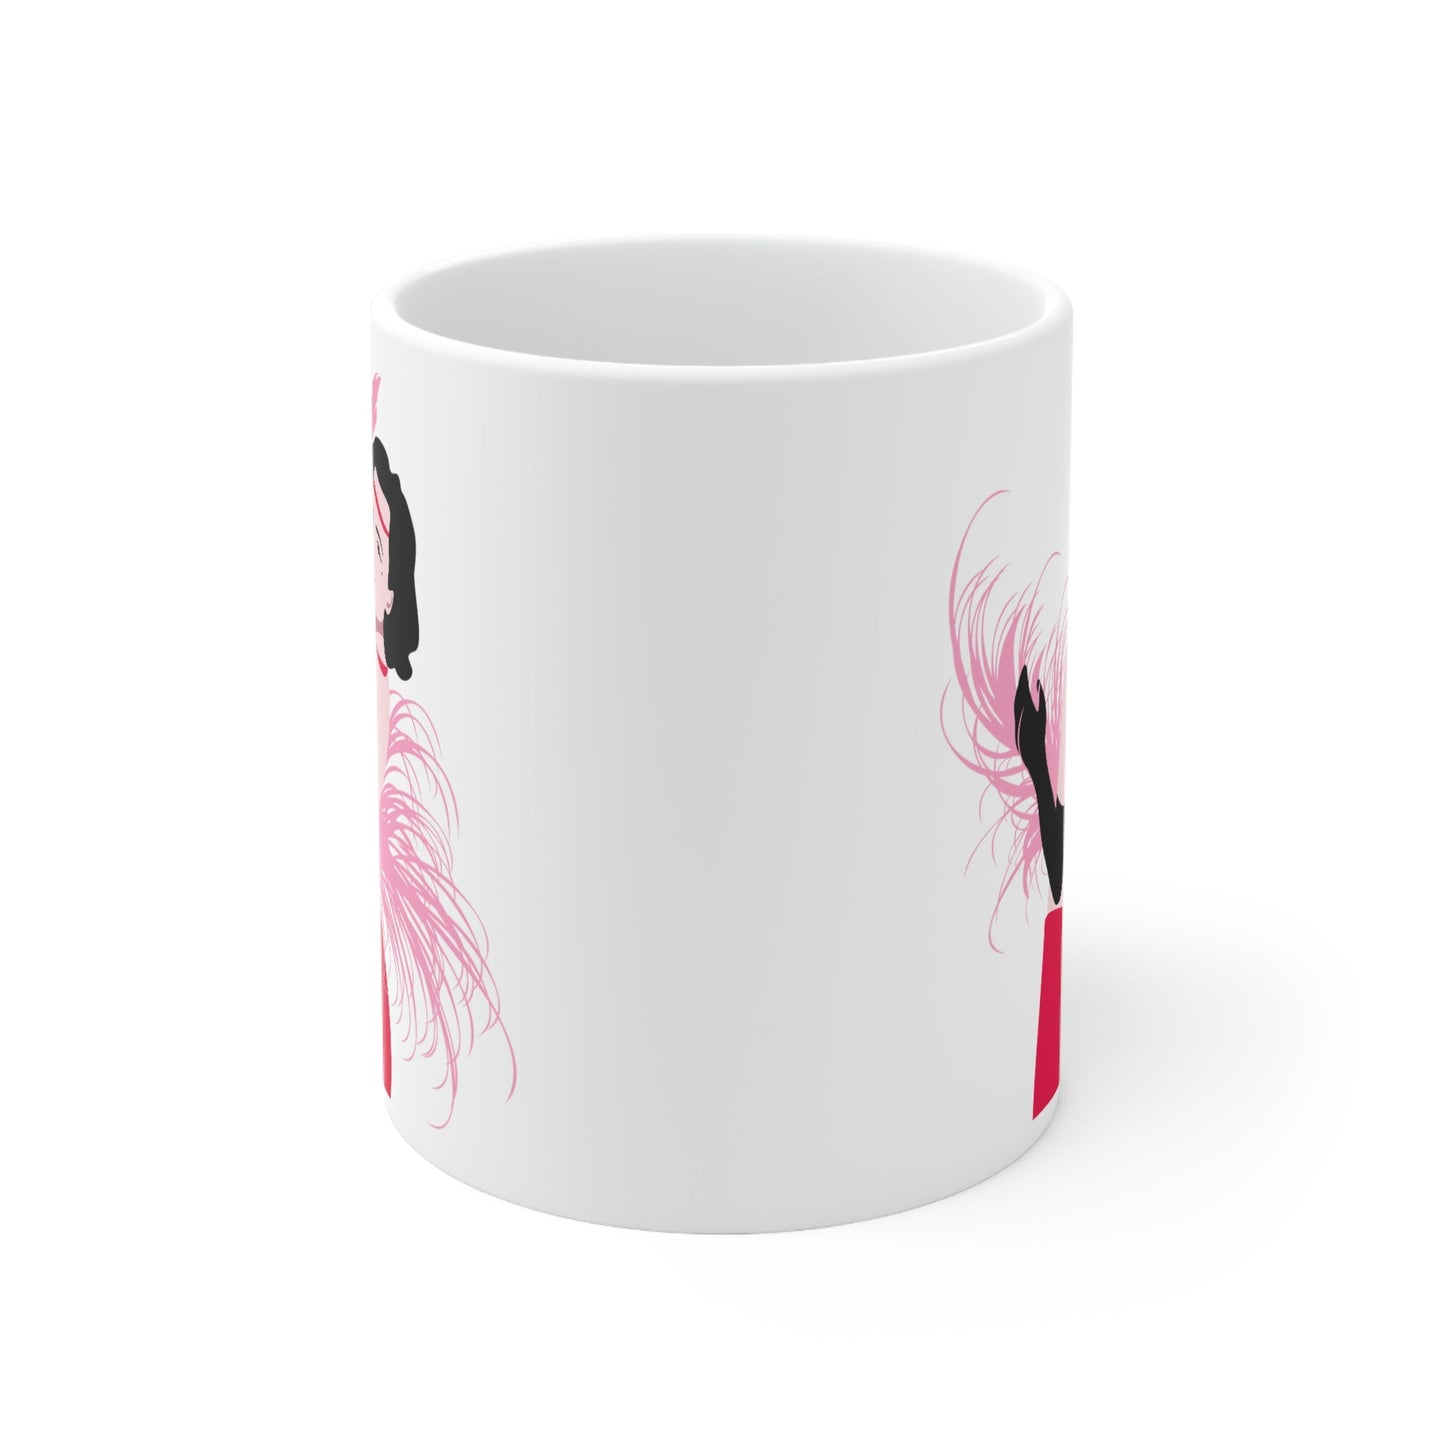 Step Back in Time with Retro Woman 40s Style Ceramic Mug 11oz Ichaku [Perfect Gifts Selection]